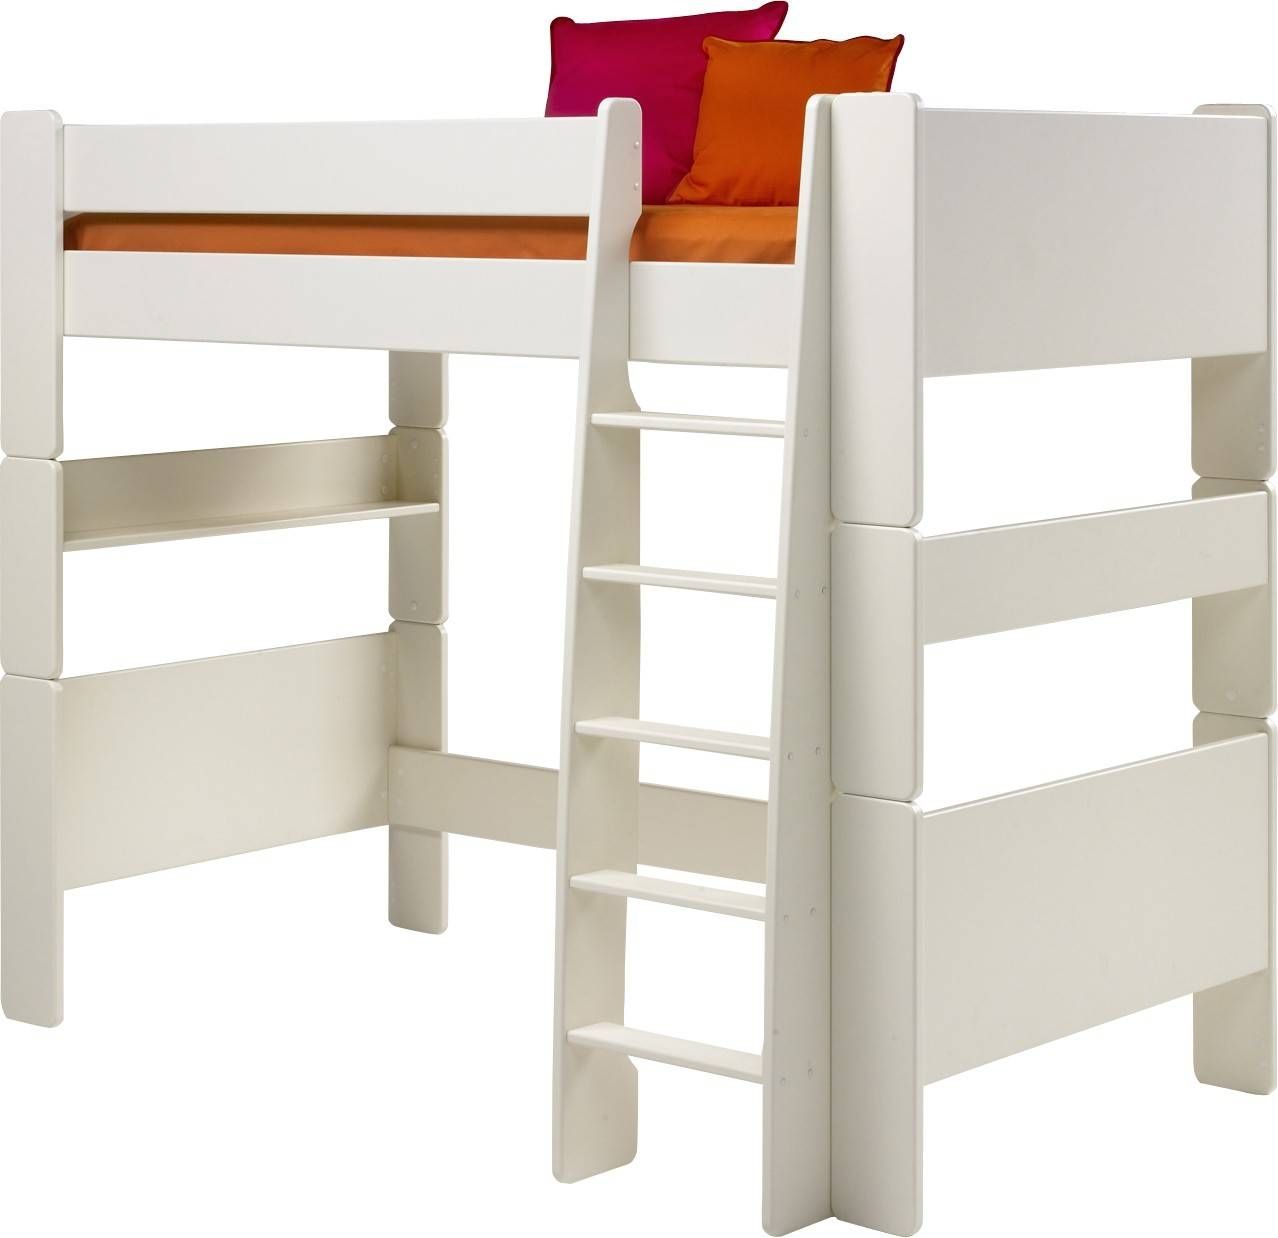 Steens For Kids Highsleeper Bed In Solid Plain White With Futon With Regard To High Sleeper Bed With Sofa (View 21 of 30)